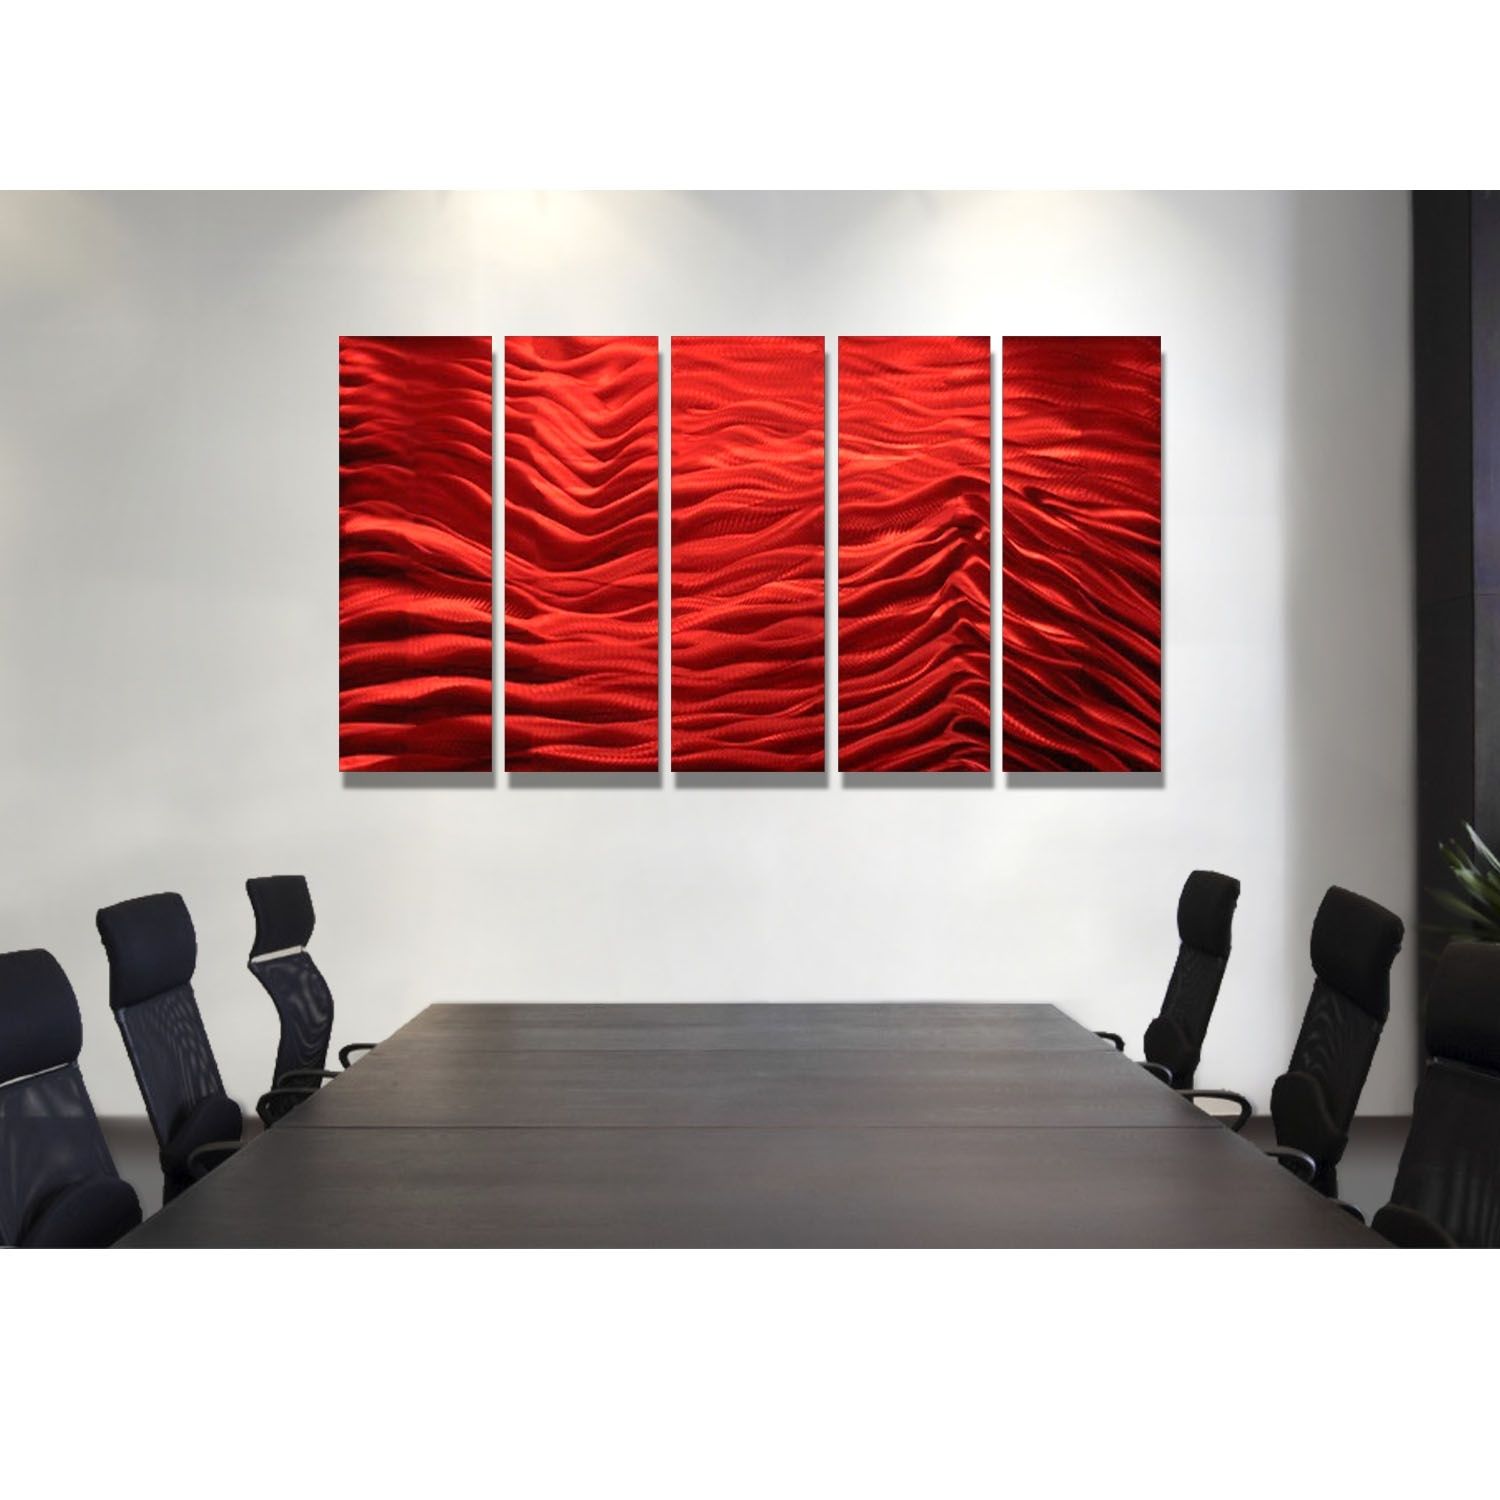 Red Inertia – Red Metal Wall Art – 5 Panel Wall Décorjon Allen Pertaining To Red Wall Art (View 6 of 20)